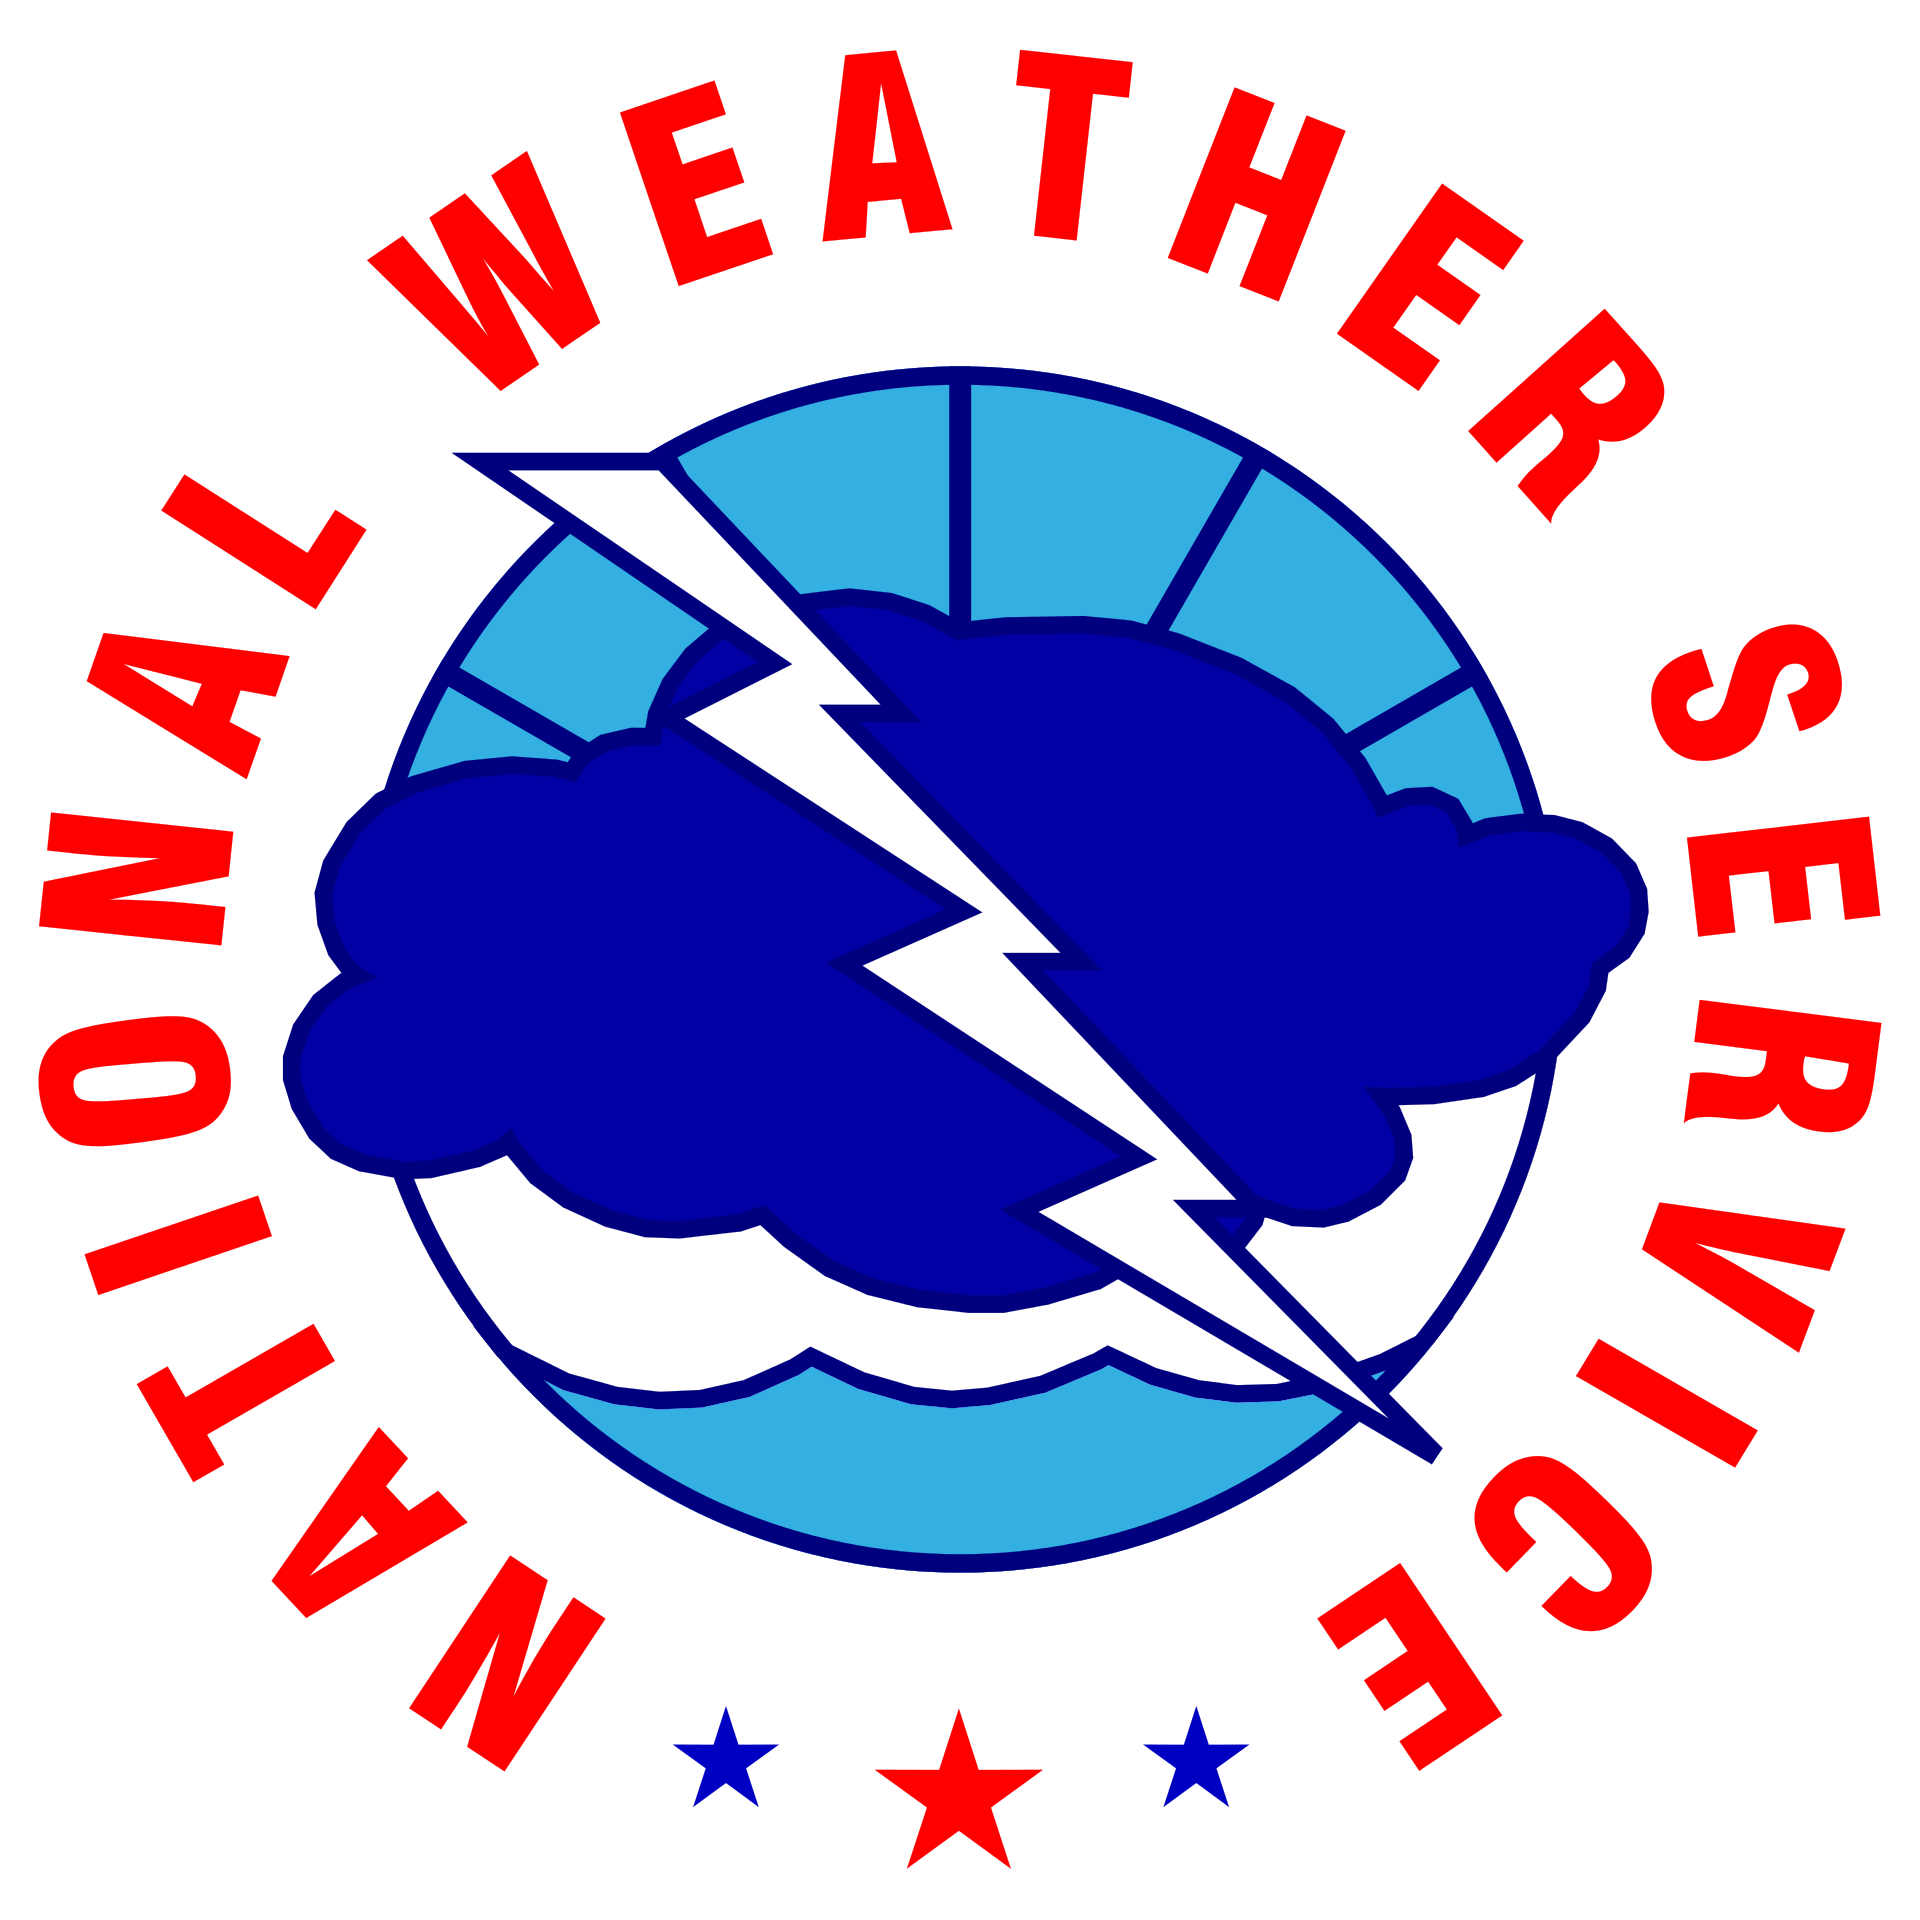 National Weather Service At 150 CosmosPNW